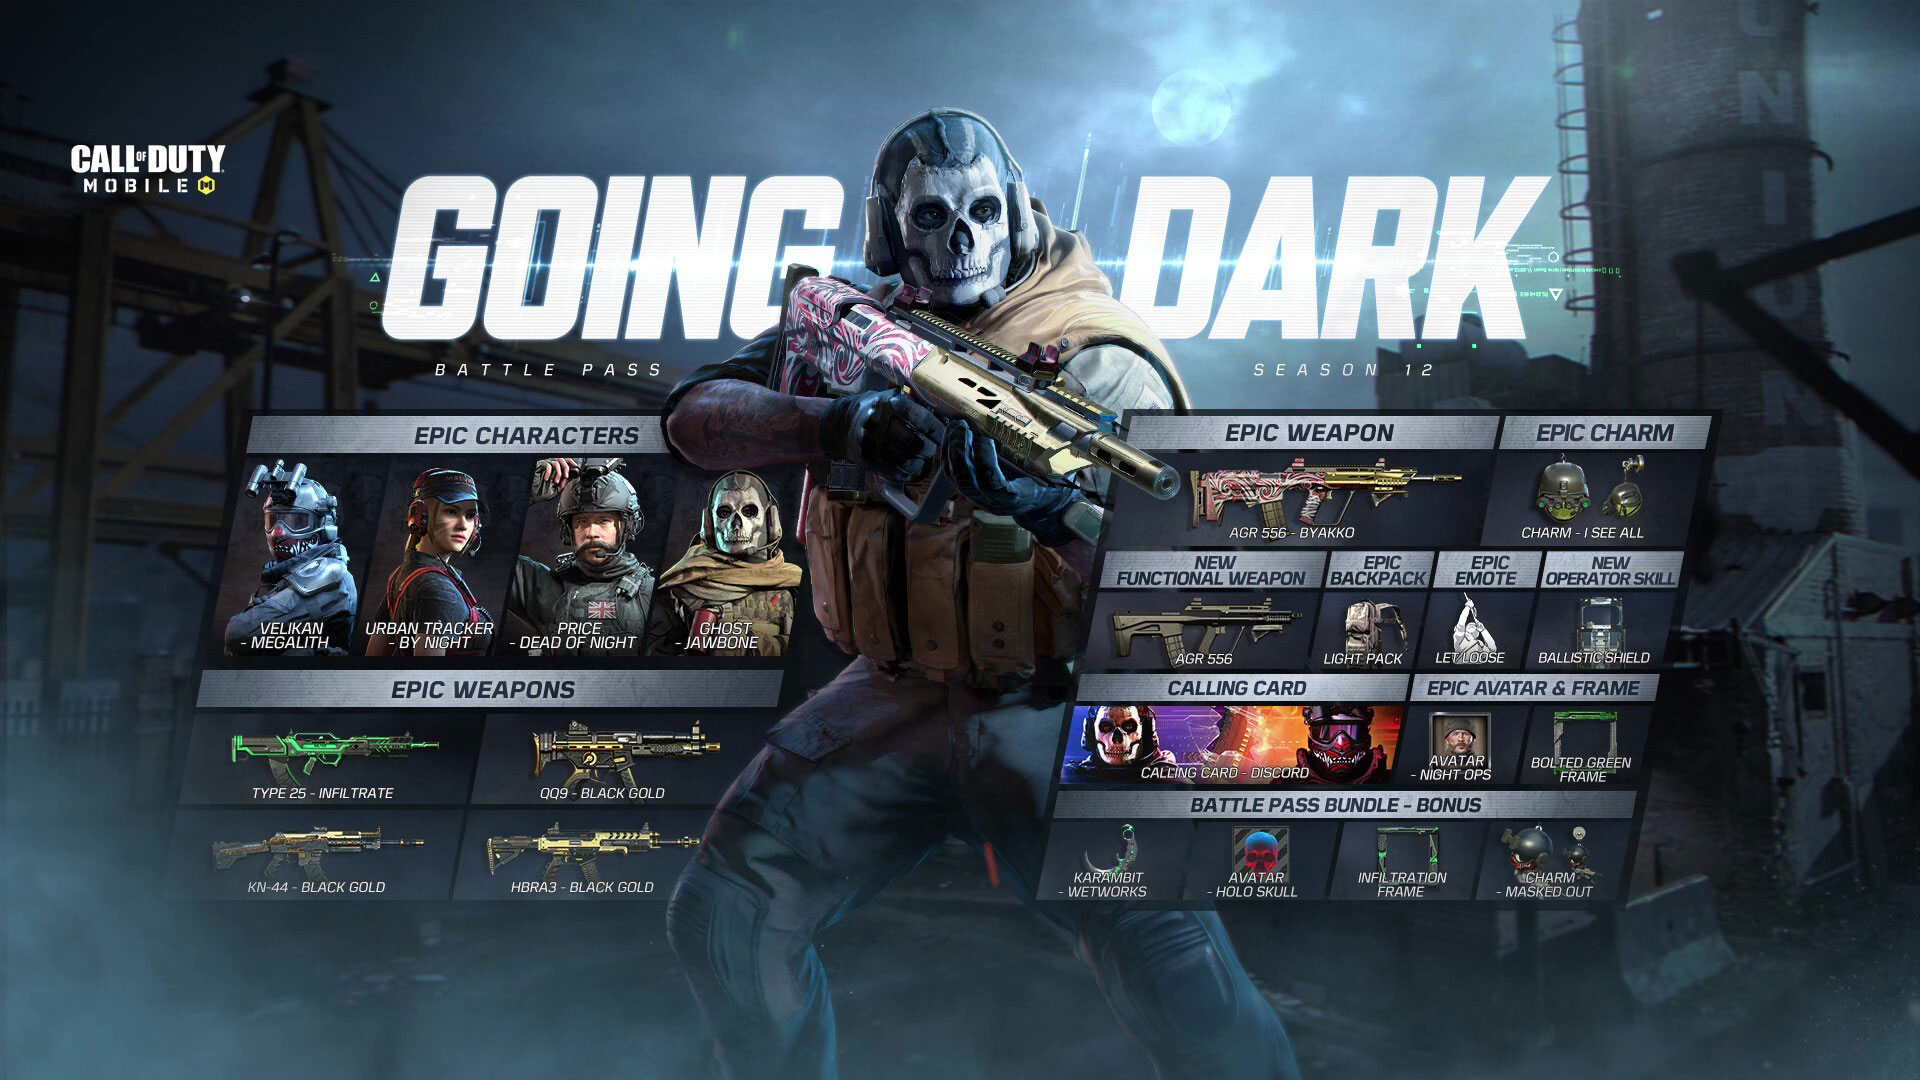 Night Descends on Call of Duty®: Mobile in Going Dark, the Latest Season  Launching November 11.